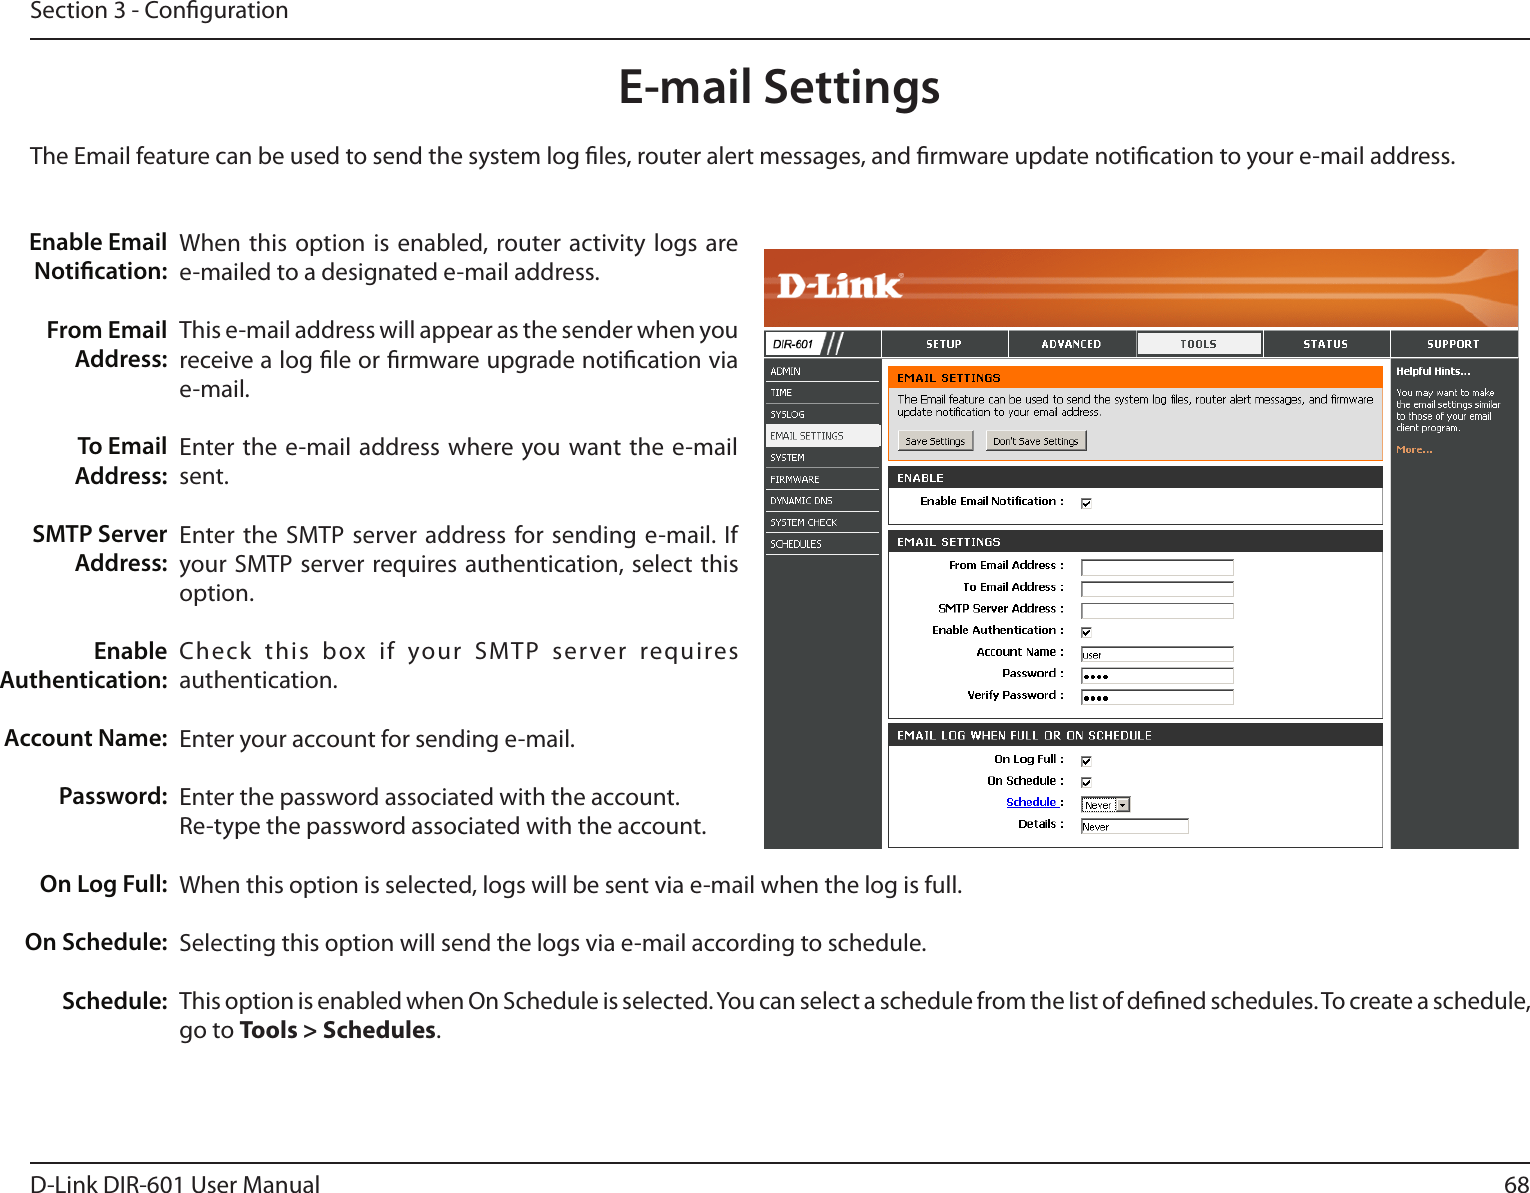 68D-Link DIR-601 User ManualSection 3 - CongurationE-mail SettingsThe Email feature can be used to send the system log les, router alert messages, and rmware update notication to your e-mail address. Enable Email Notication: From Email Address:To Email Address:SMTP Server Address:Enable Authentication:Account Name:Password:On Log Full:On Schedule:Schedule:When  this  option  is  enabled, router activity logs  are e-mailed to a designated e-mail address.This e-mail address will appear as the sender when you receive a log le or rmware upgrade notication via e-mail.Enter the e-mail address where you want the e-mail sent. Enter the SMTP server address for sending e-mail. If your SMTP server requires authentication, select  this option.Check  this  box  if  your  SMTP  server  requires authentication. Enter your account for sending e-mail.Enter the password associated with the account. Re-type the password associated with the account.When this option is selected, logs will be sent via e-mail when the log is full.Selecting this option will send the logs via e-mail according to schedule.This option is enabled when On Schedule is selected. You can select a schedule from the list of dened schedules. To create a schedule, go to Tools&gt;Schedules.